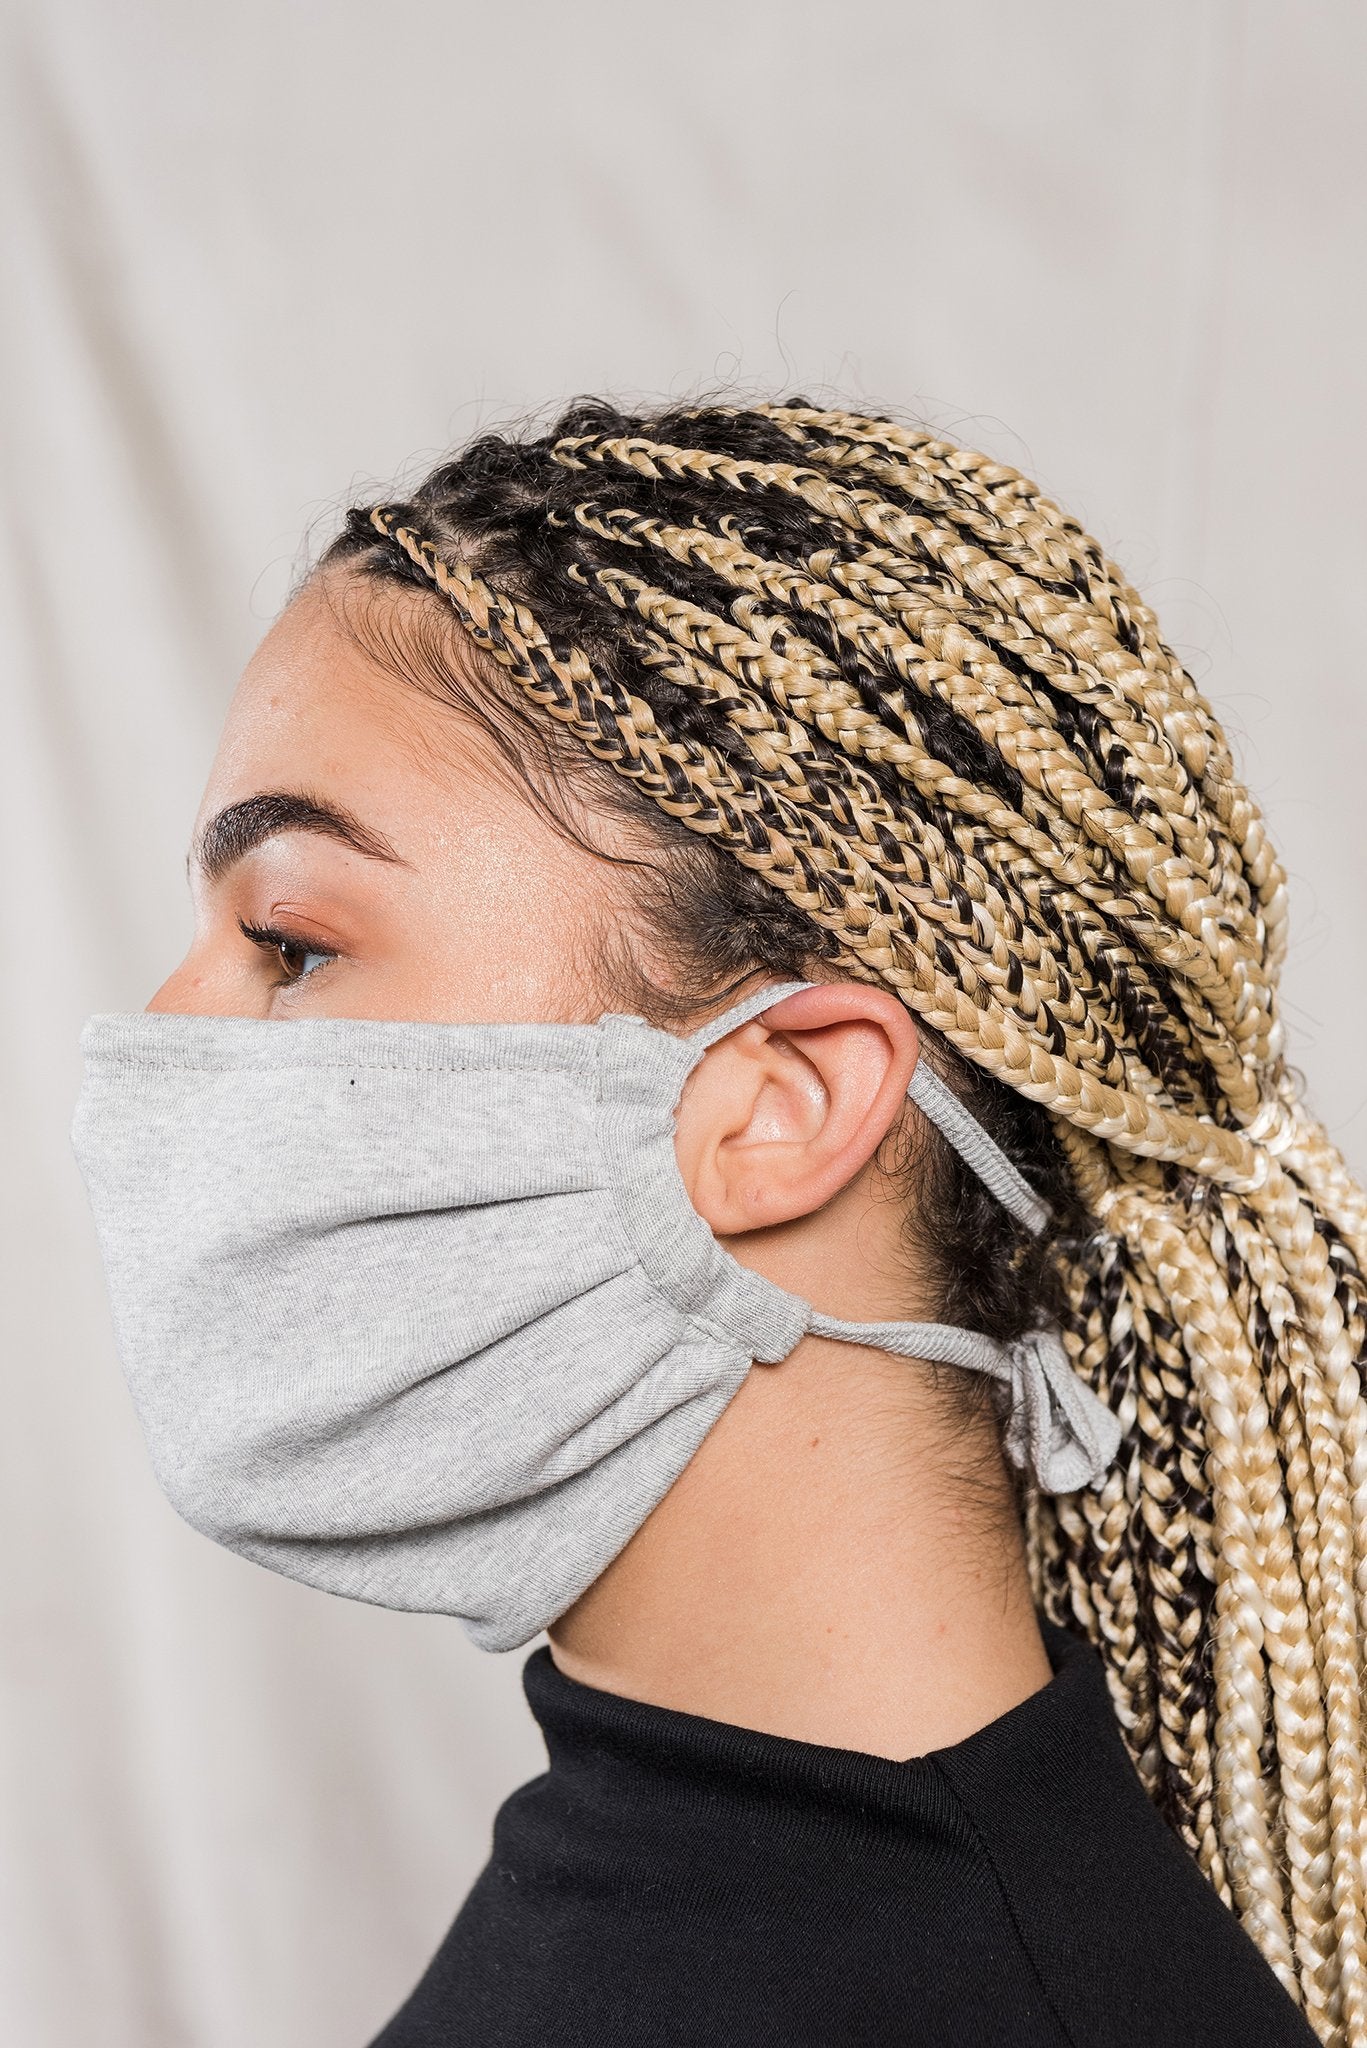 A.BCH A.00 Grey Marle Dust Mask in Organic Cotton